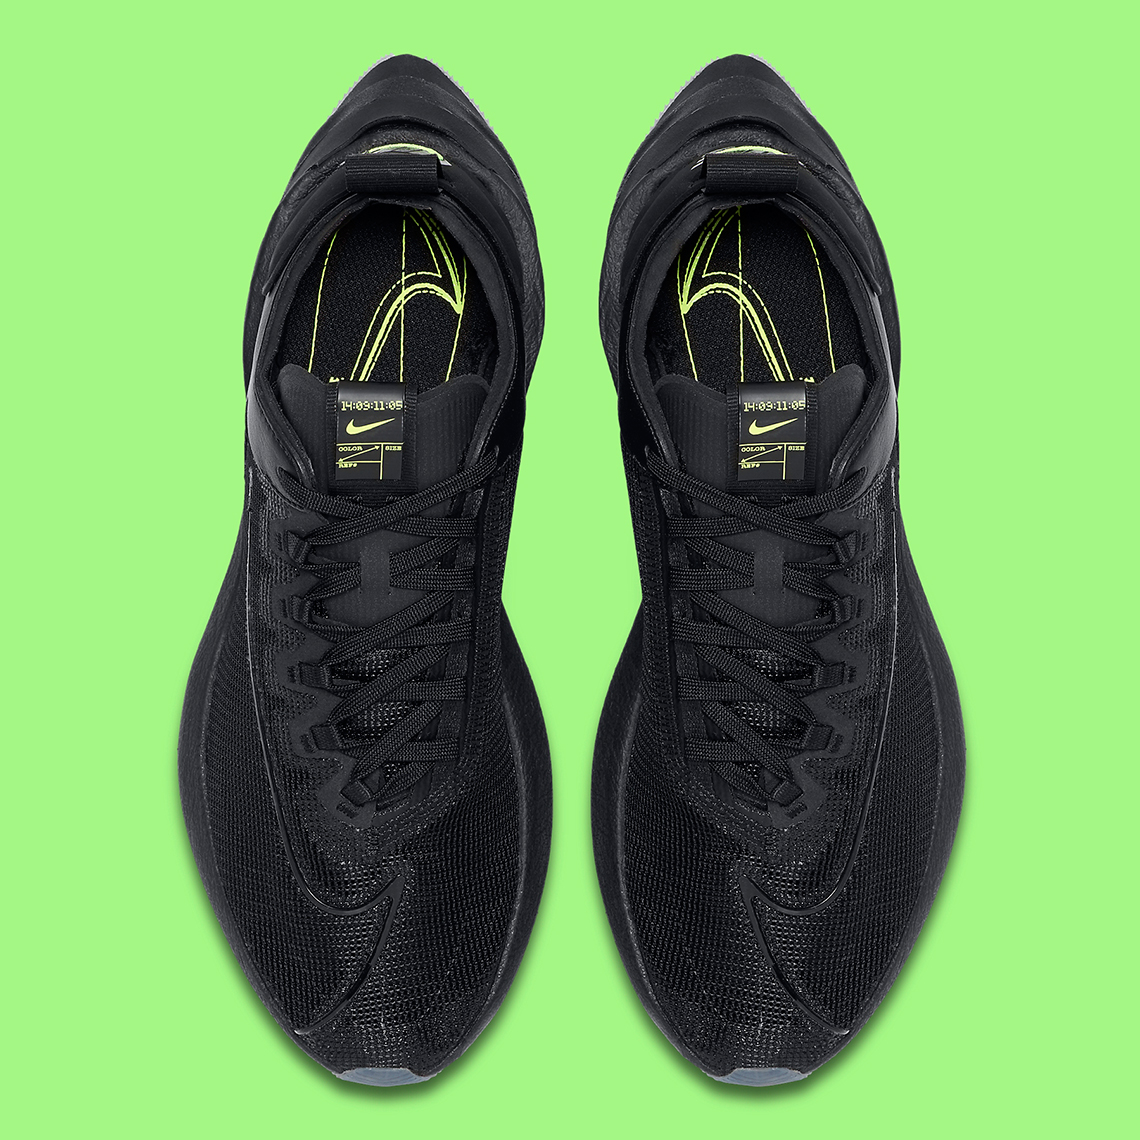 Nike Zoom Double Stacked Black Volt Ci0804 001 3